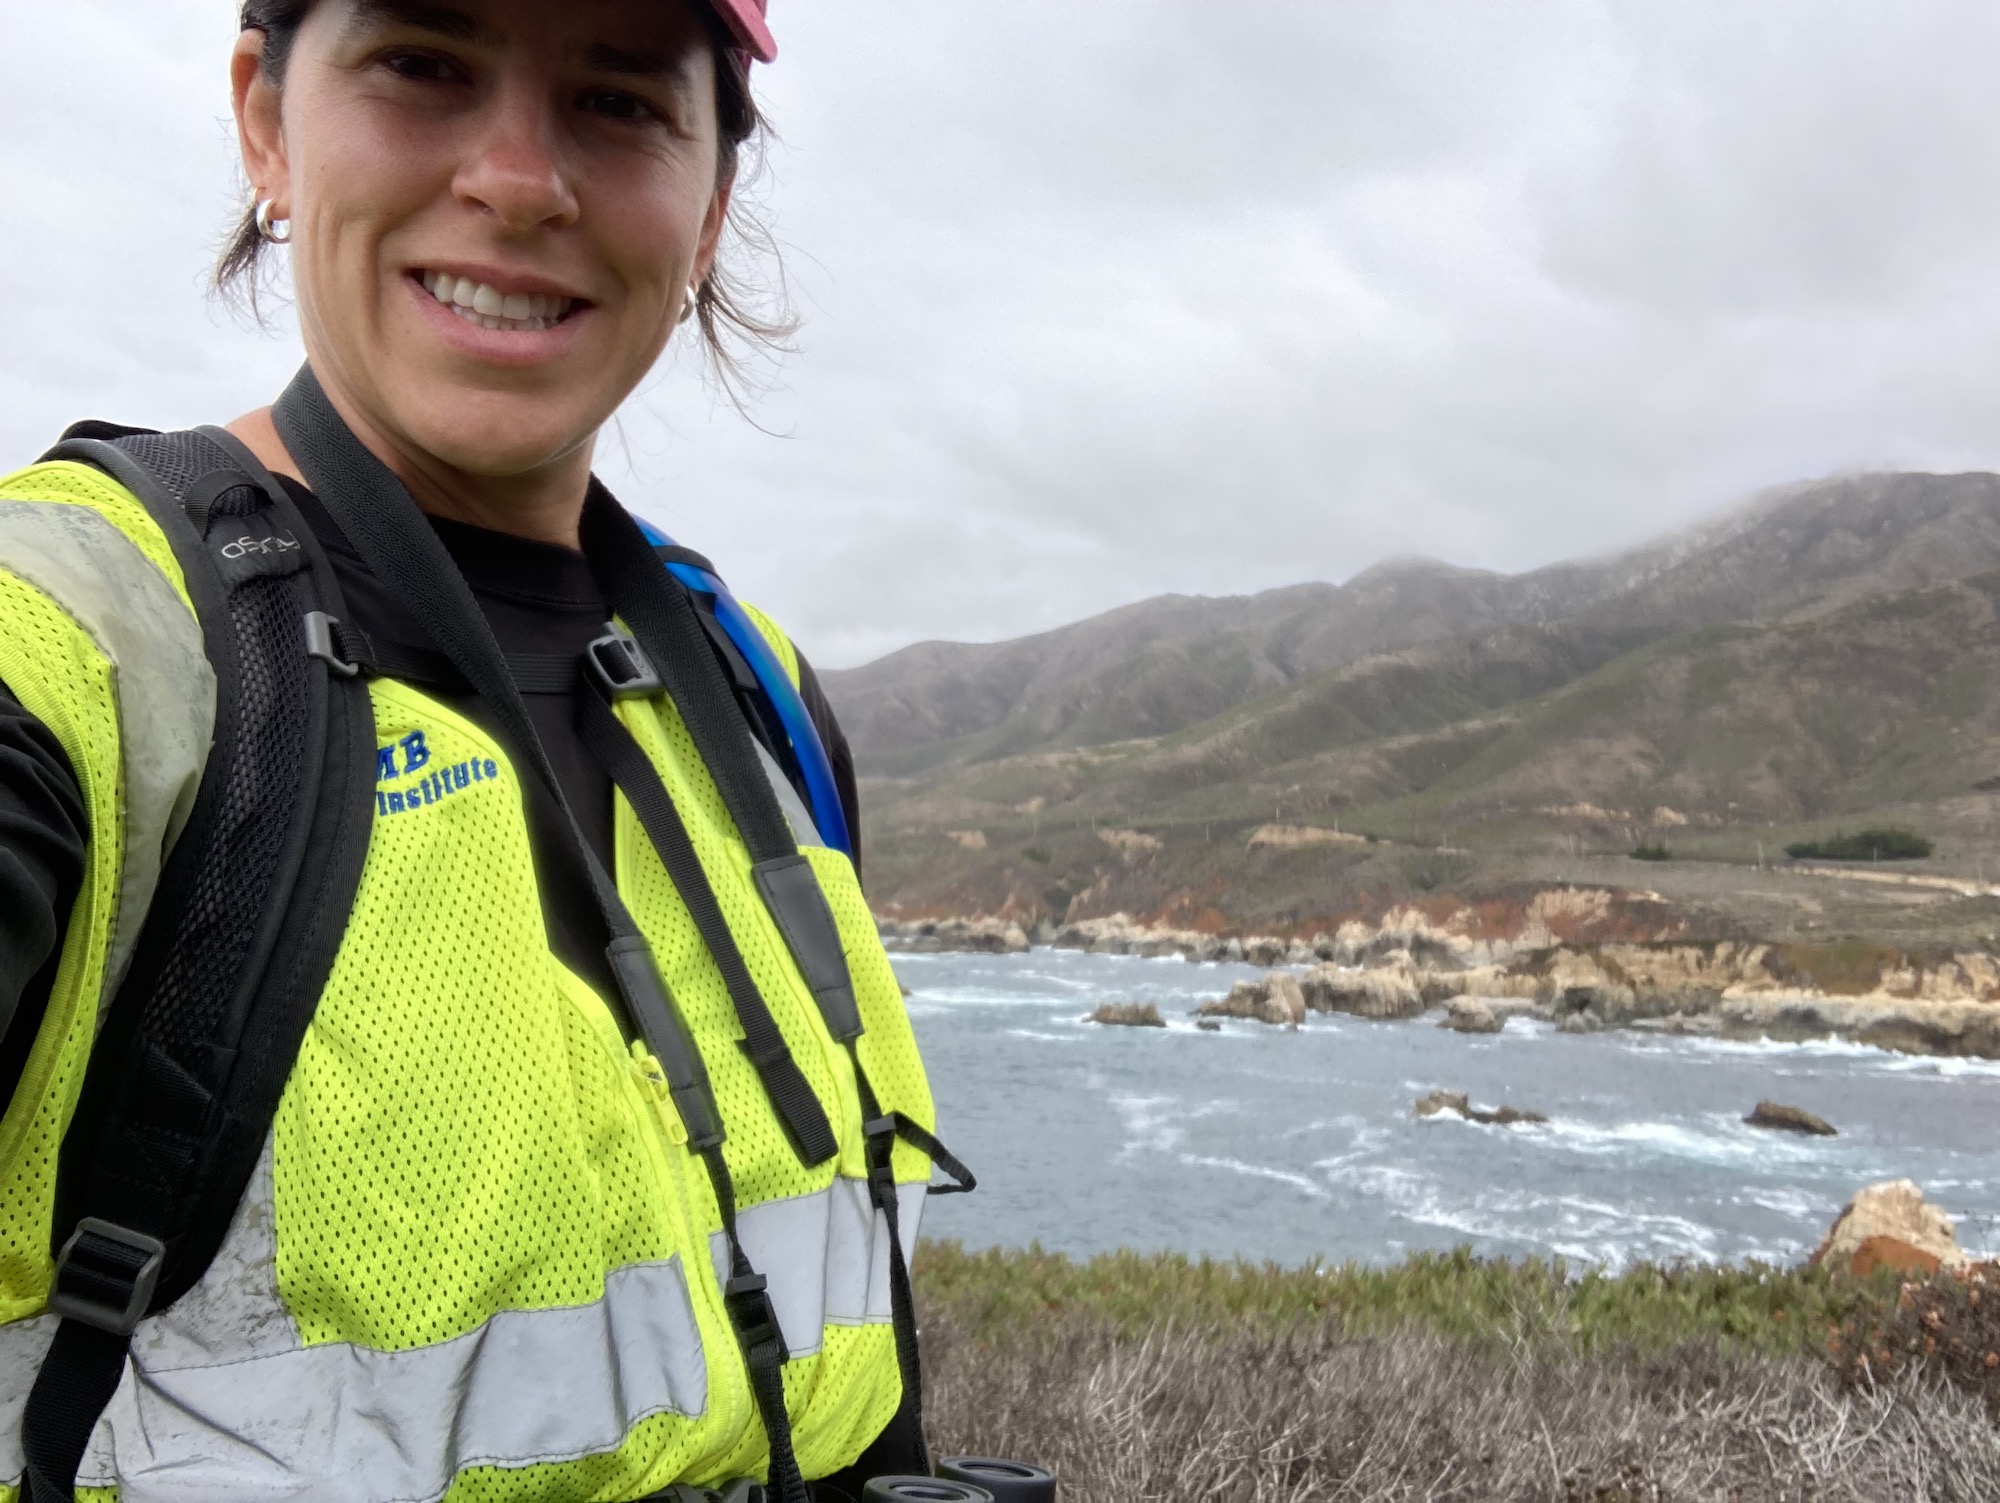 Michelle Tarian poses in front of the Big Sur coastline